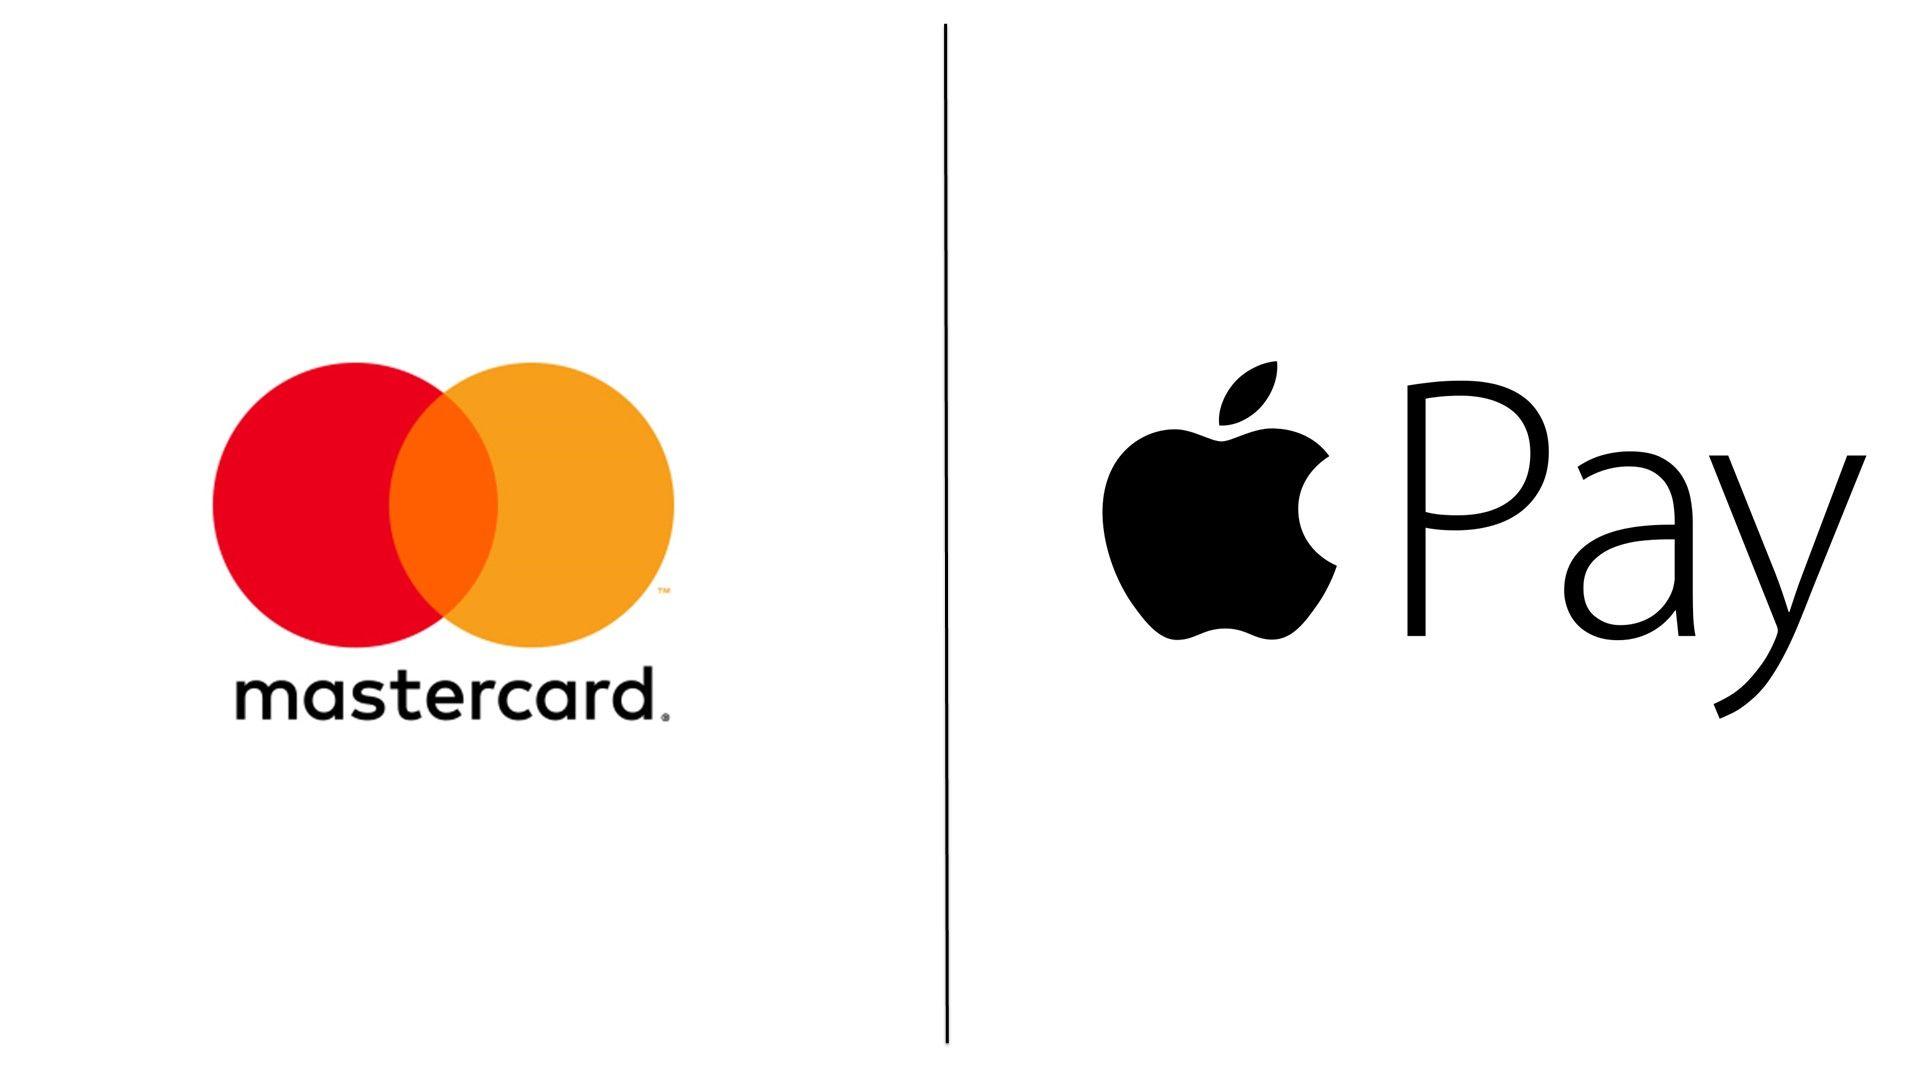 New Apple Pay Logo - Mastercard to Bring Apple Pay to Spanish Customers and Cardholders